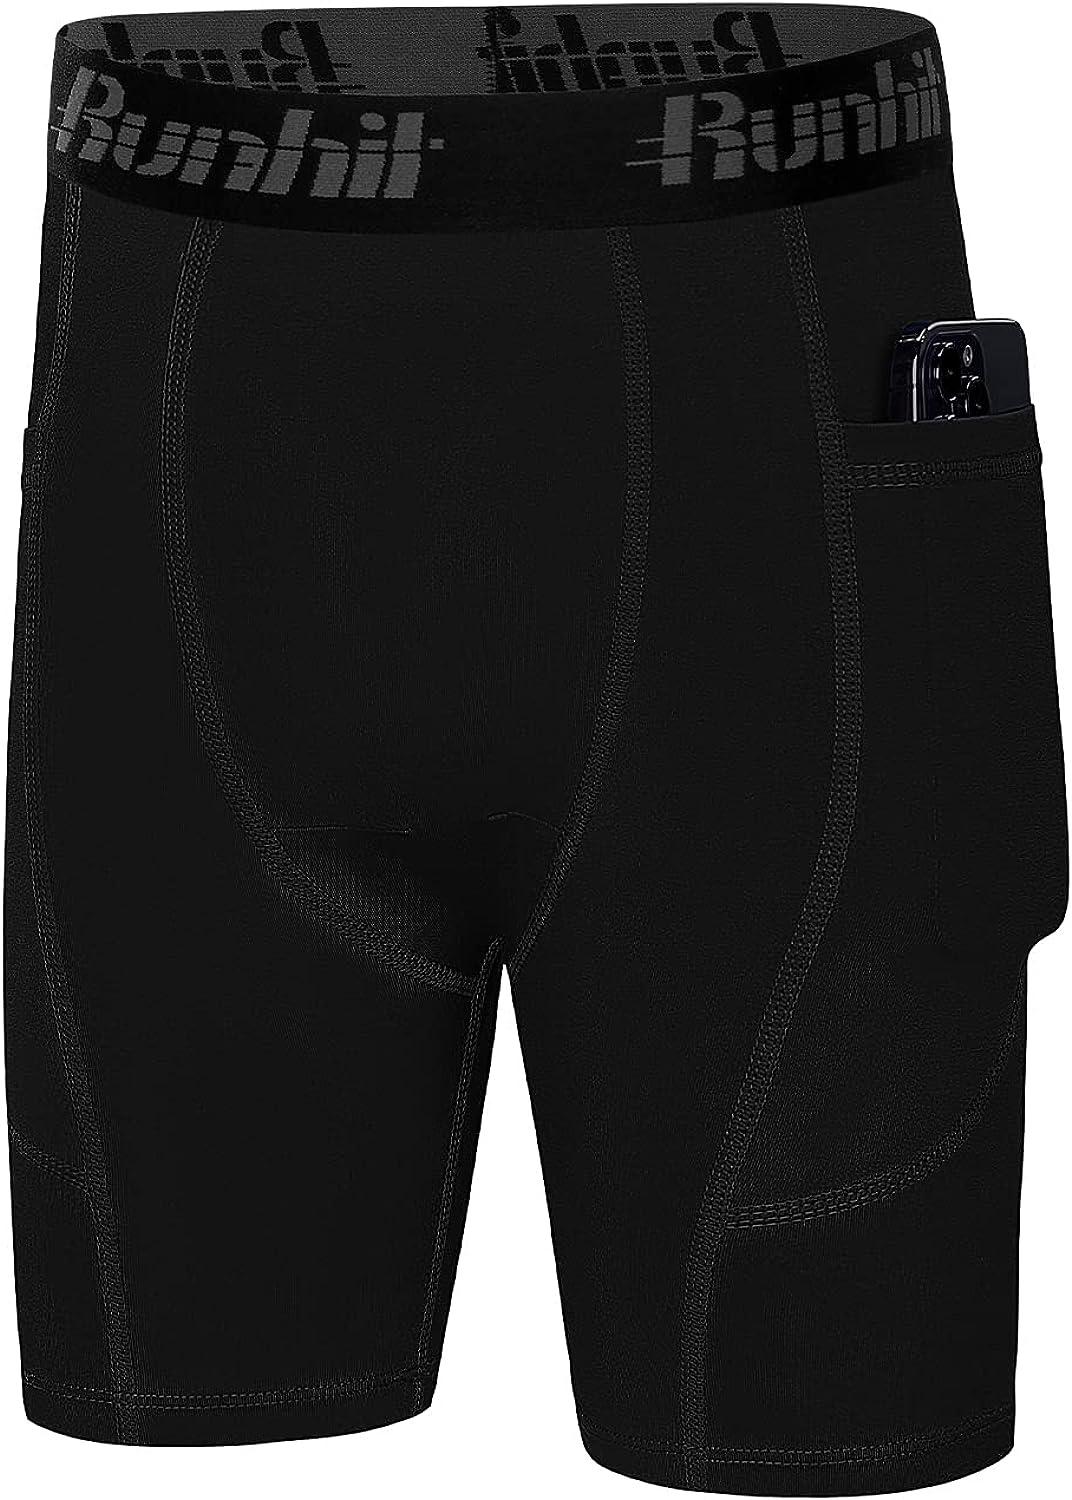 UNDER ARMOUR Solid Men Black Compression Shorts - Buy UNDER ARMOUR Solid  Men Black Compression Shorts Online at Best Prices in India